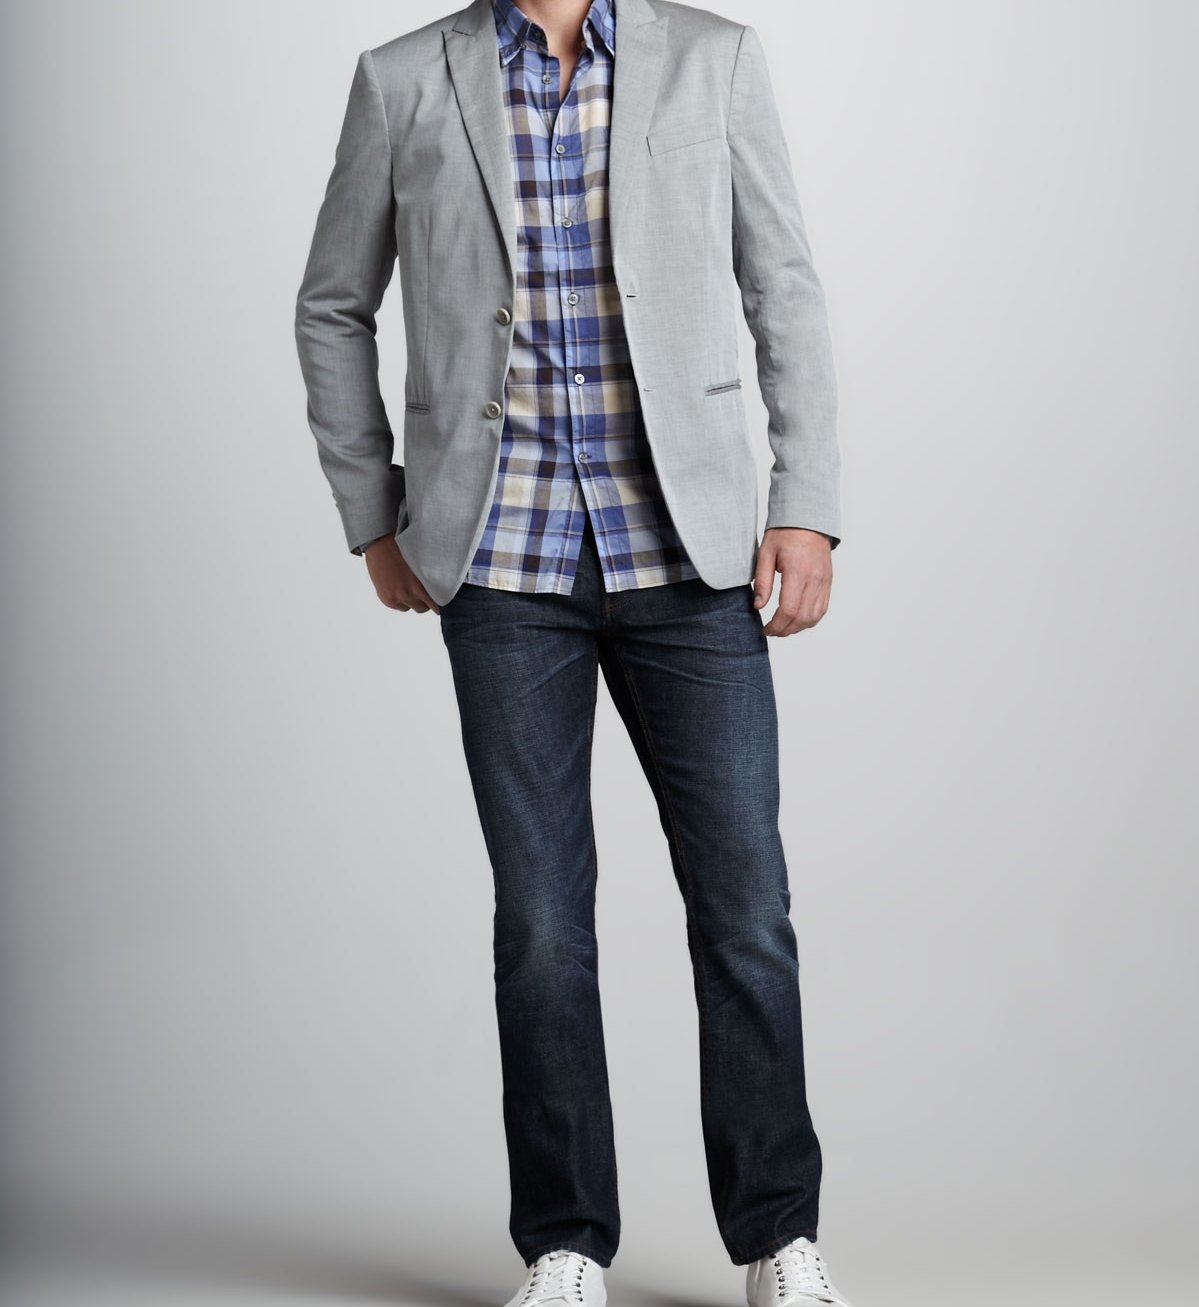 Sport Coat And Jeans Style MtIg89